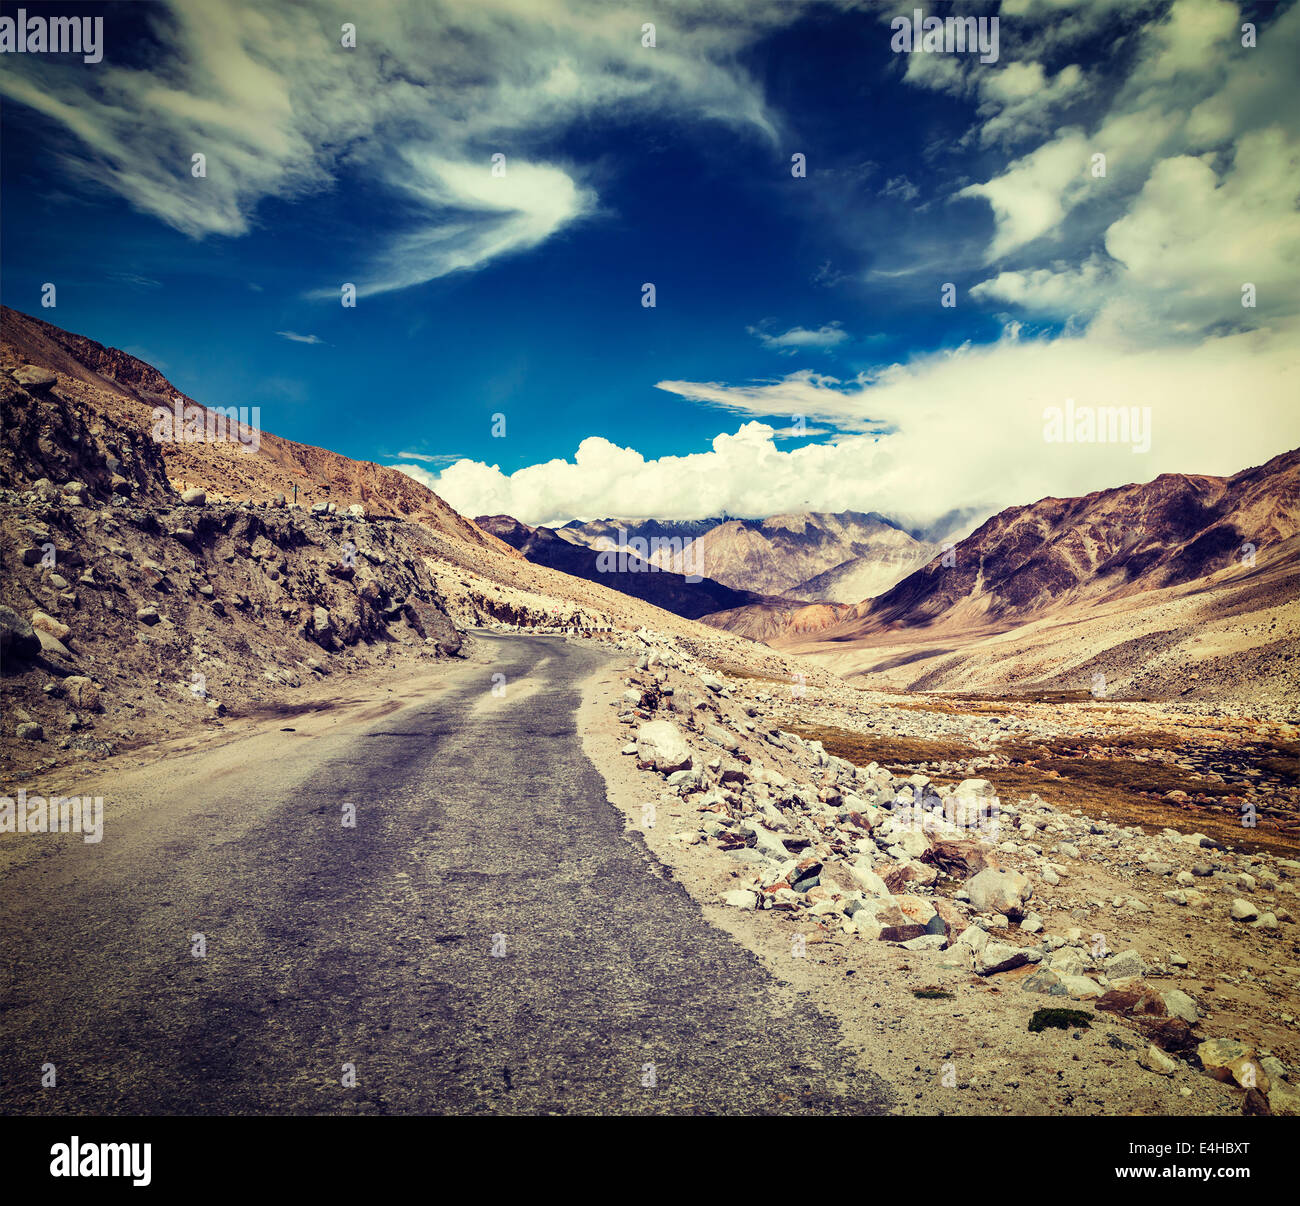 Vintage retro effect filtered hipster style travel image of Scenic road in Himalayas near Khardung-La pass. Ladakh, India Stock Photo